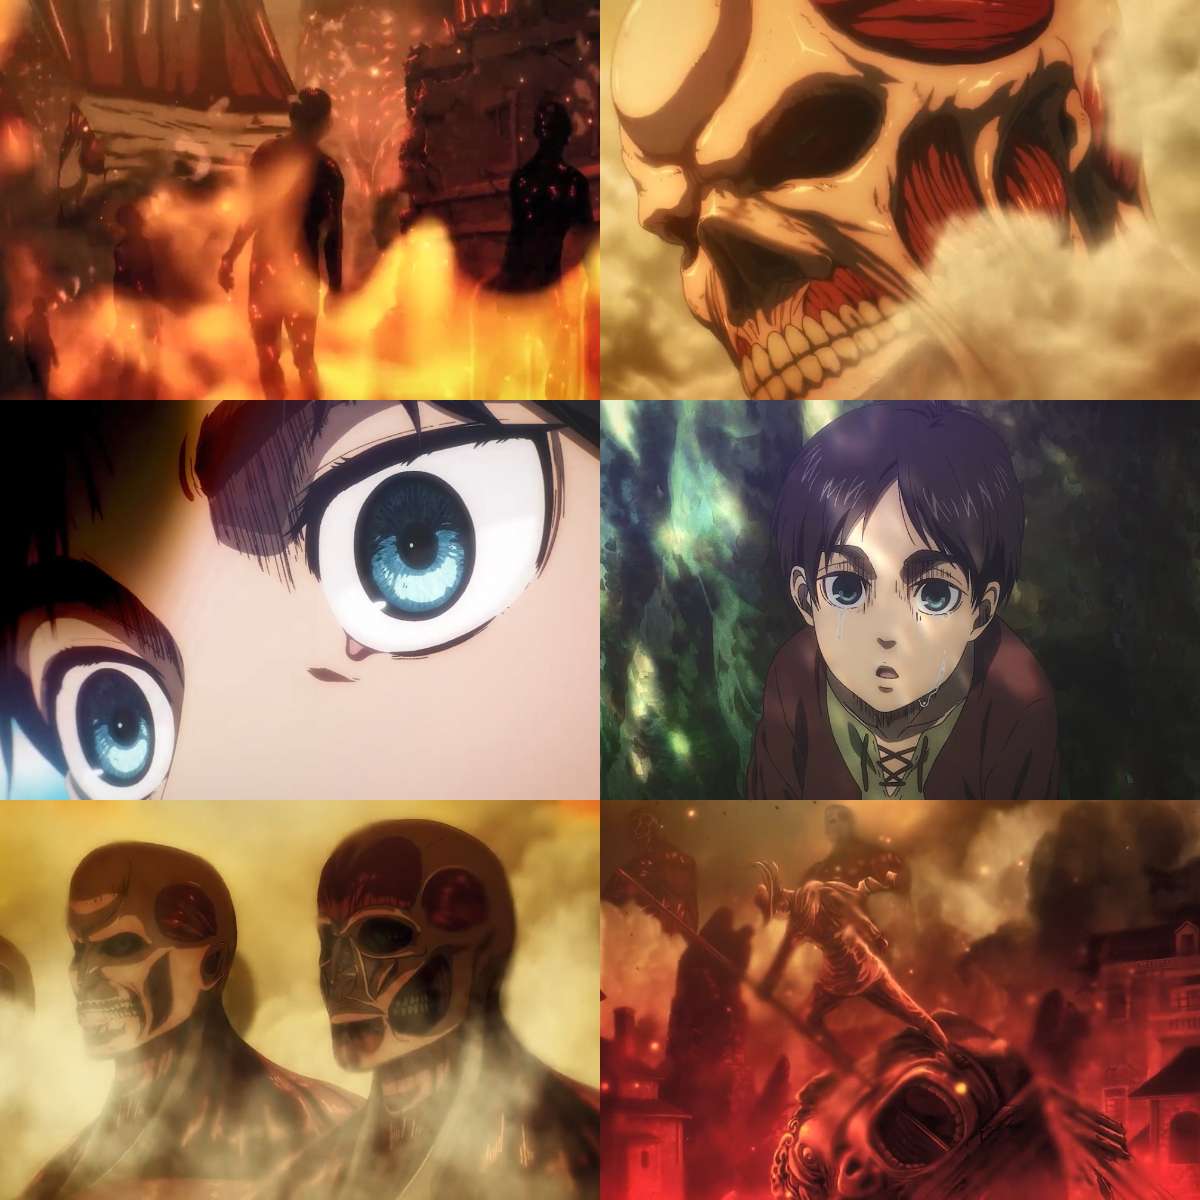 17. Part 3 of Thoughts on the “Attack on Titan” Season 4 Trailer